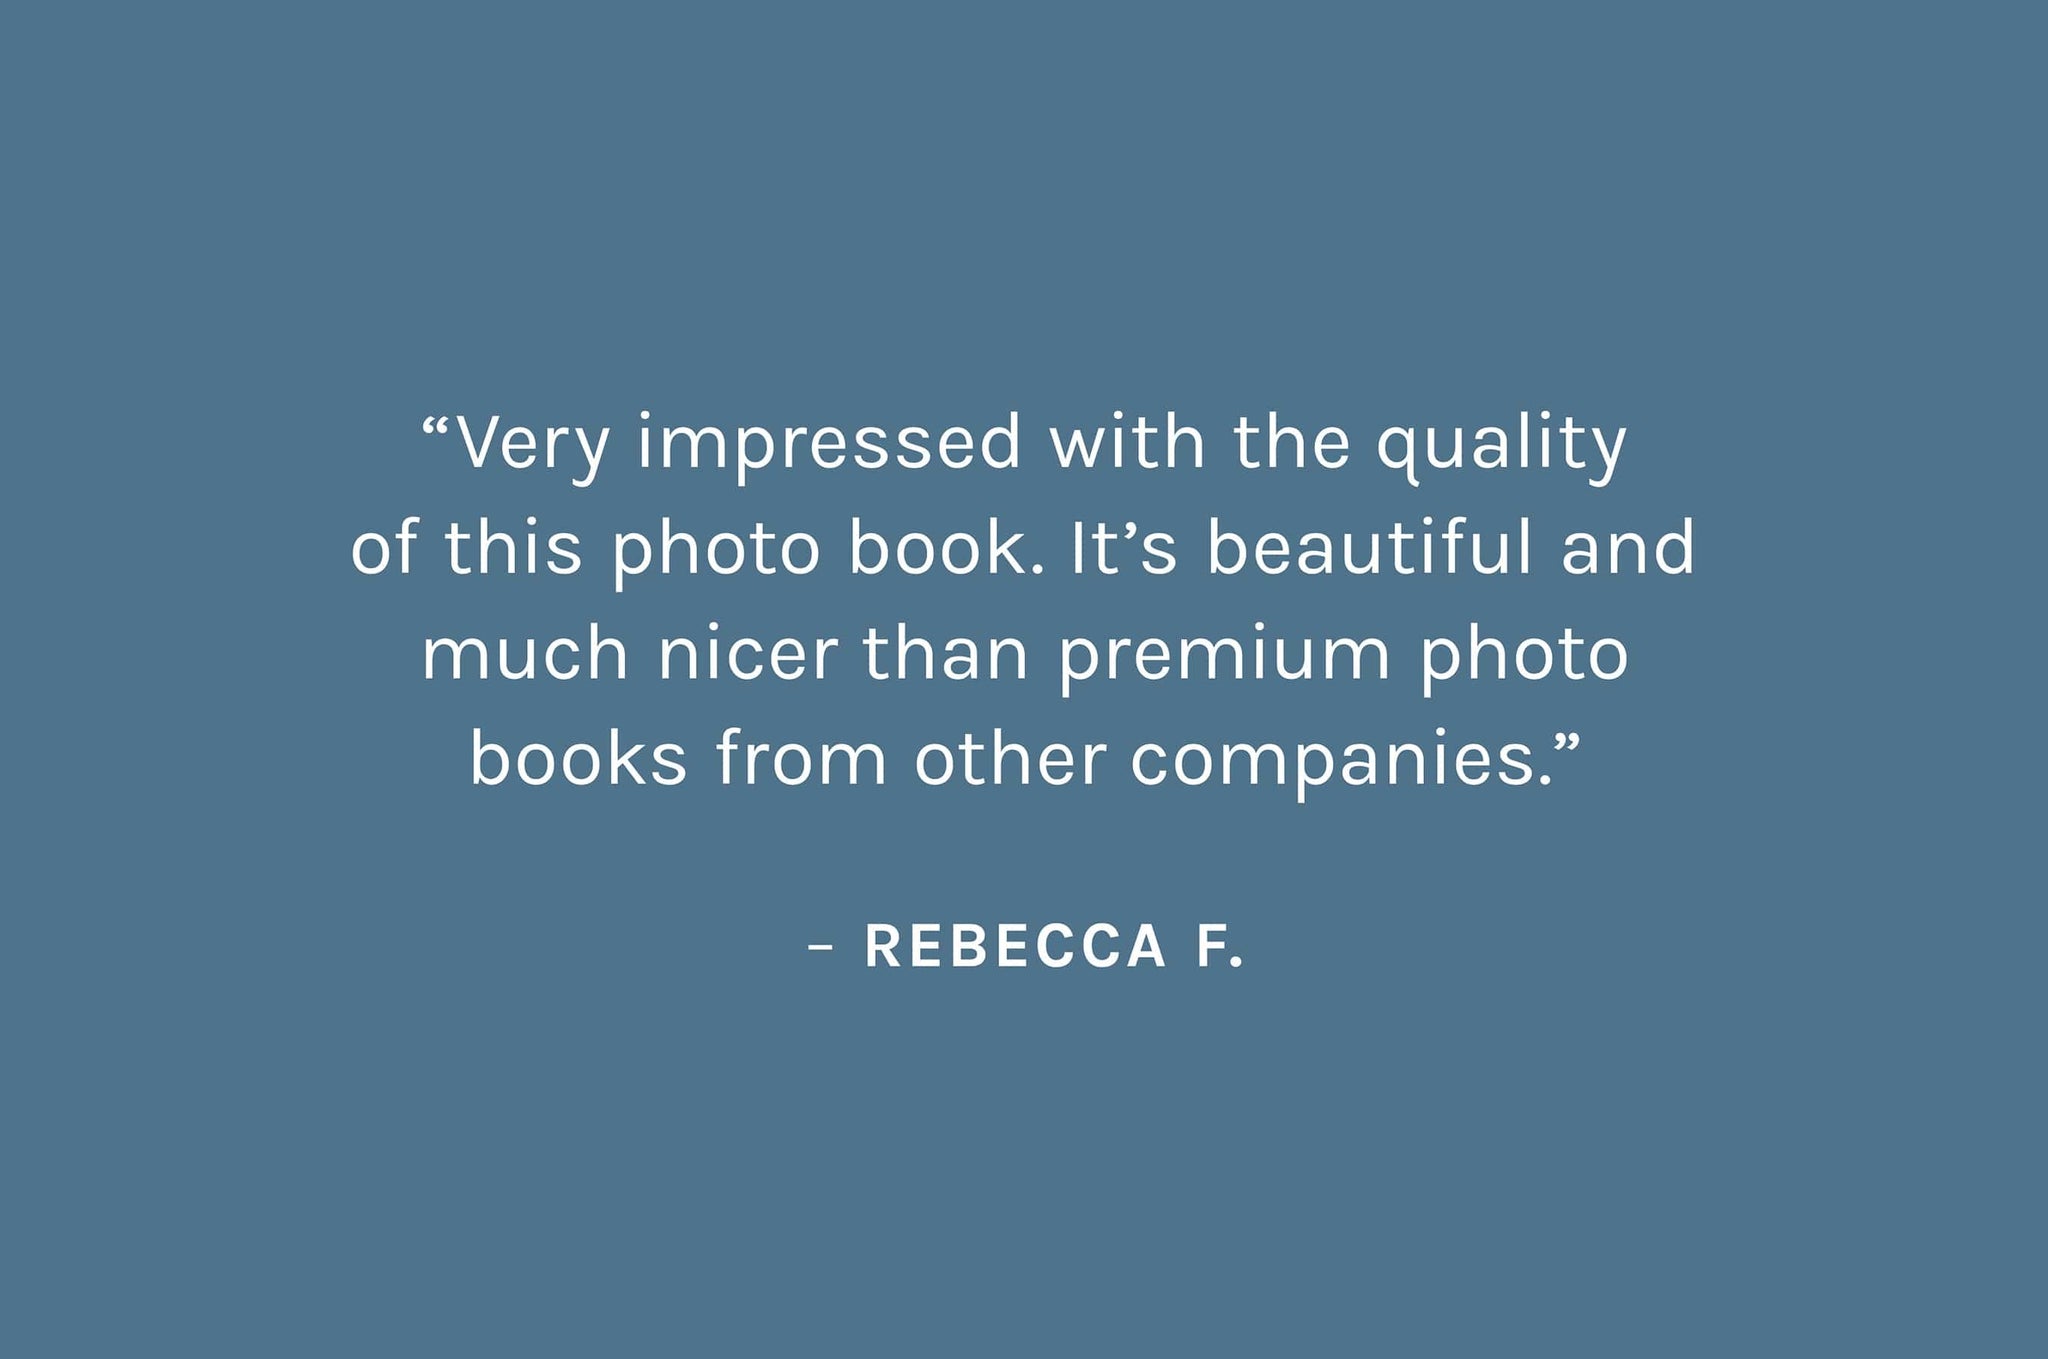 Customer review: Very impressed with the quality of this photo book. It’s beautiful and much nicer than premium photo books from other companies. – Rebecca F.